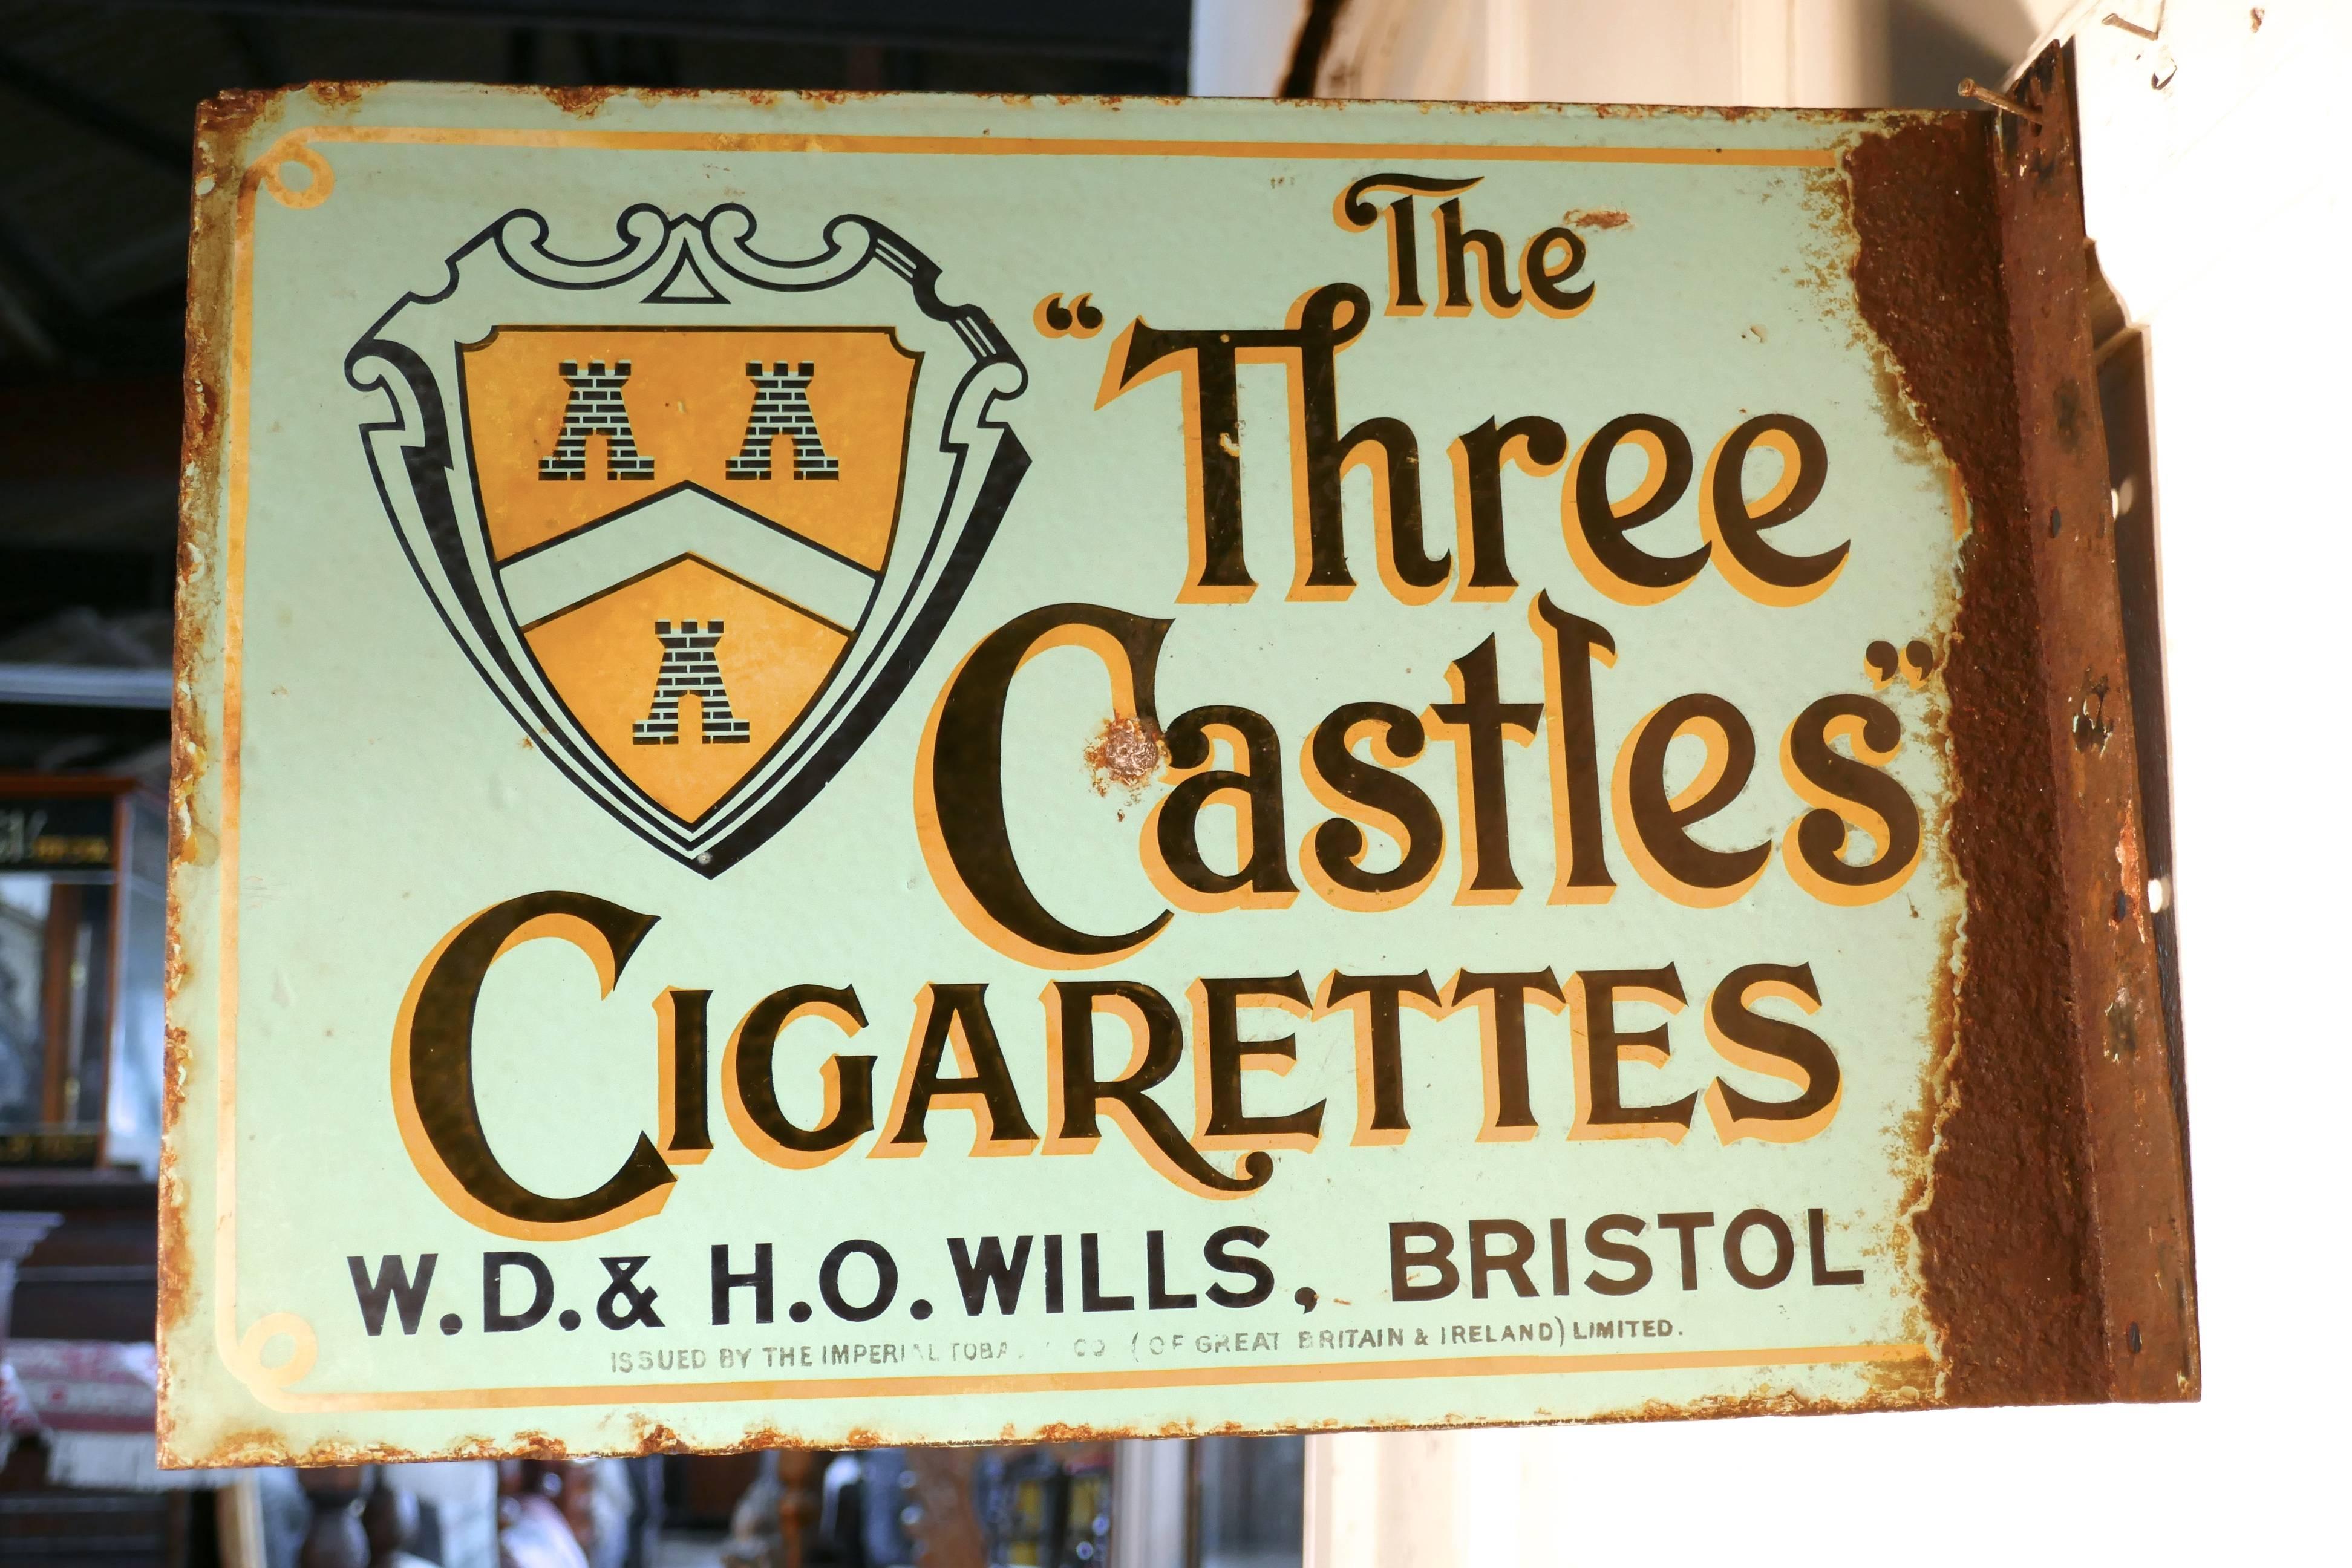 Original Wills cigarette pictorial advertising enamel sign 

Very rare old sign, blue background, bright yellow and black writing advertising The Three Castles Cigarettes, WD & HO Wills Bristol
This is a double sides sign, that has right angle